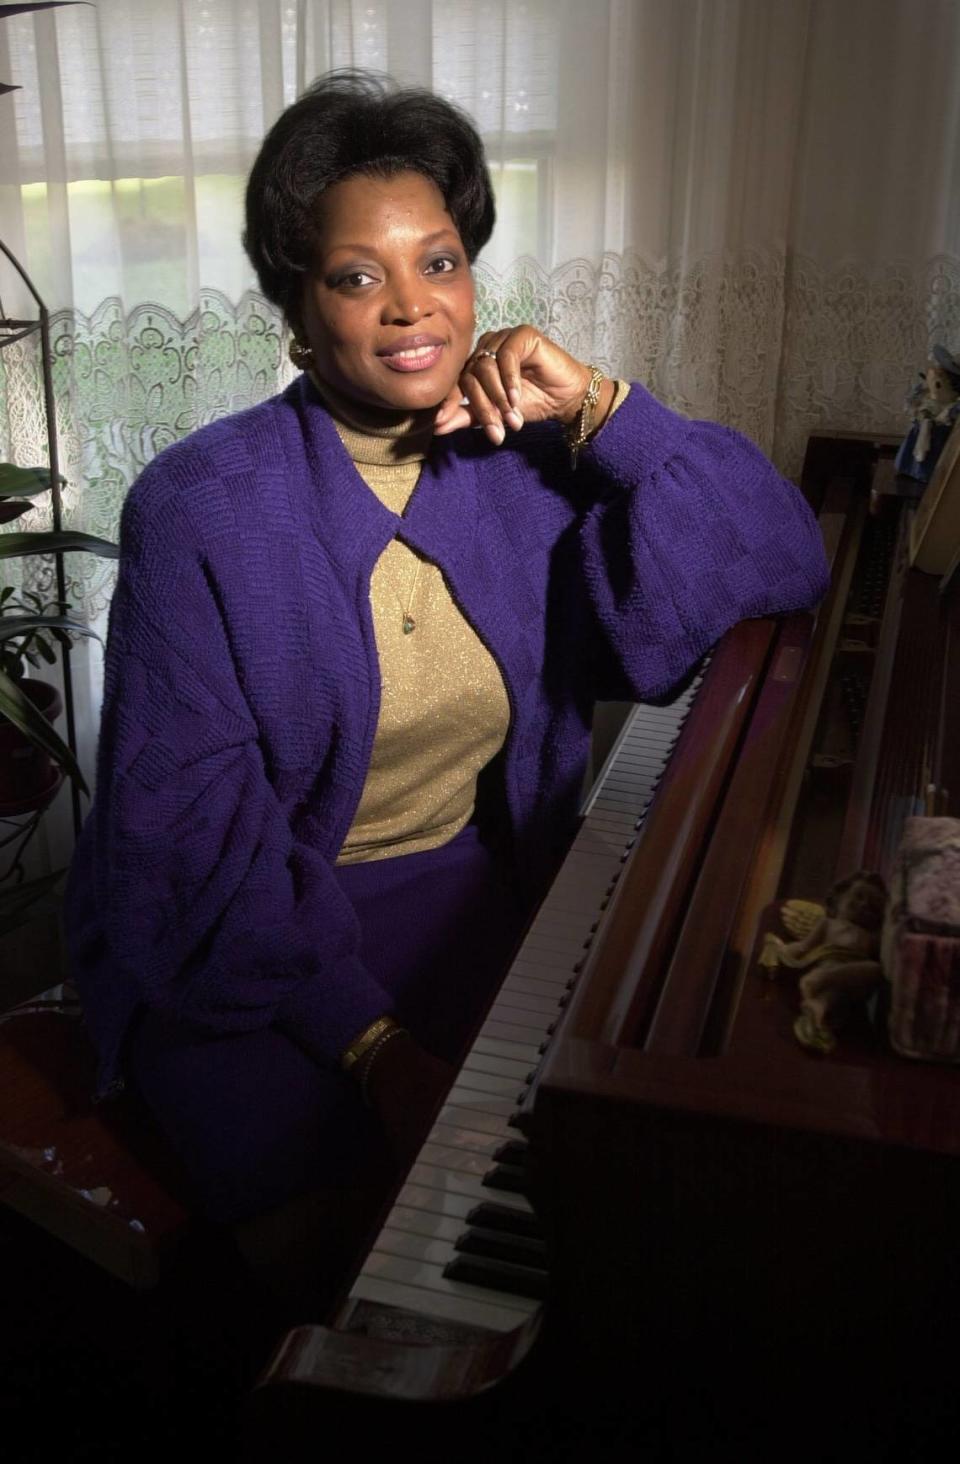 Wilhelmenia Fernandez-Smith, photographed at her home in Lexington, Ky., on 11/13/02, is a world-renowned soprano who continues her international singing career while living in Lexington.